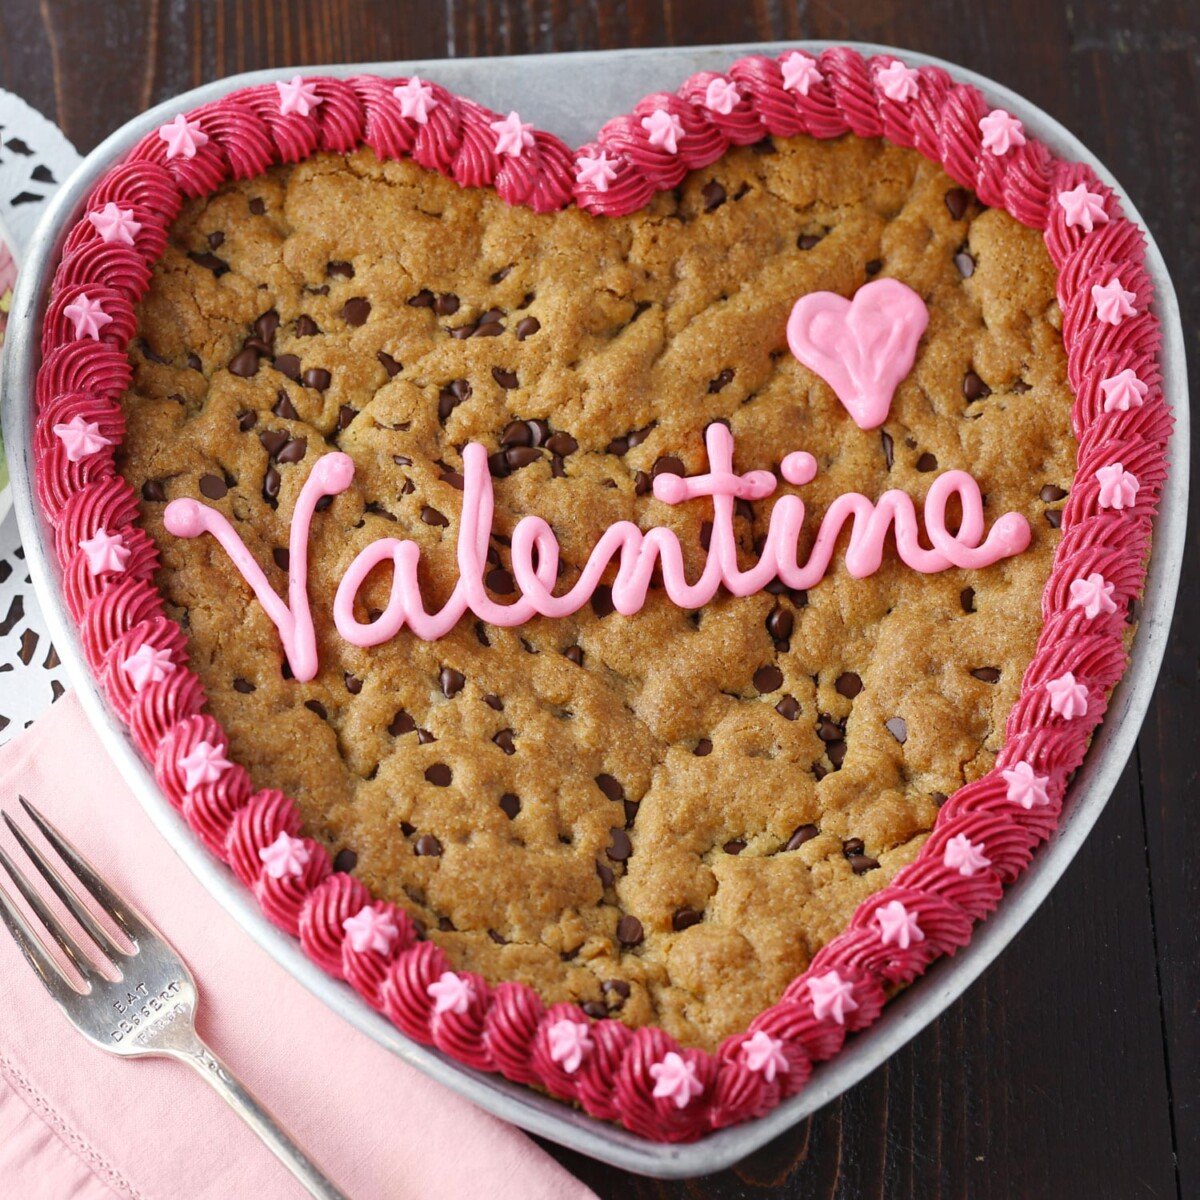 https://www.momlovesbaking.com/wp-content/uploads/2019/02/Giant-Free-Chocolate-Chip-Cookie-Heart-SQ-e1674341530801.jpg